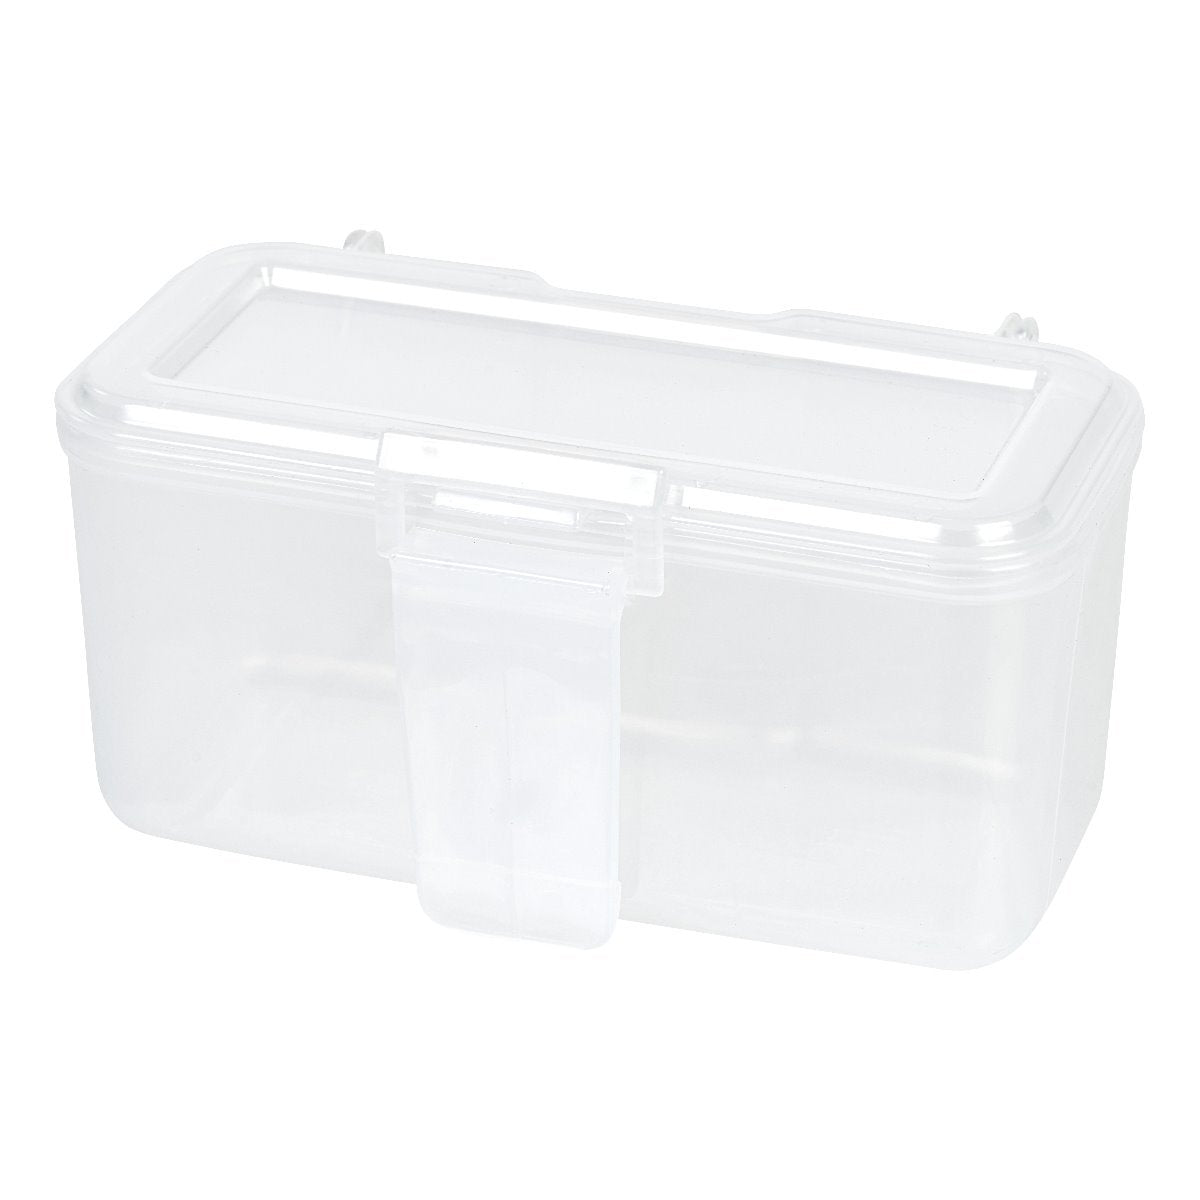 Portable Project Case - 6-inch x 6-inch